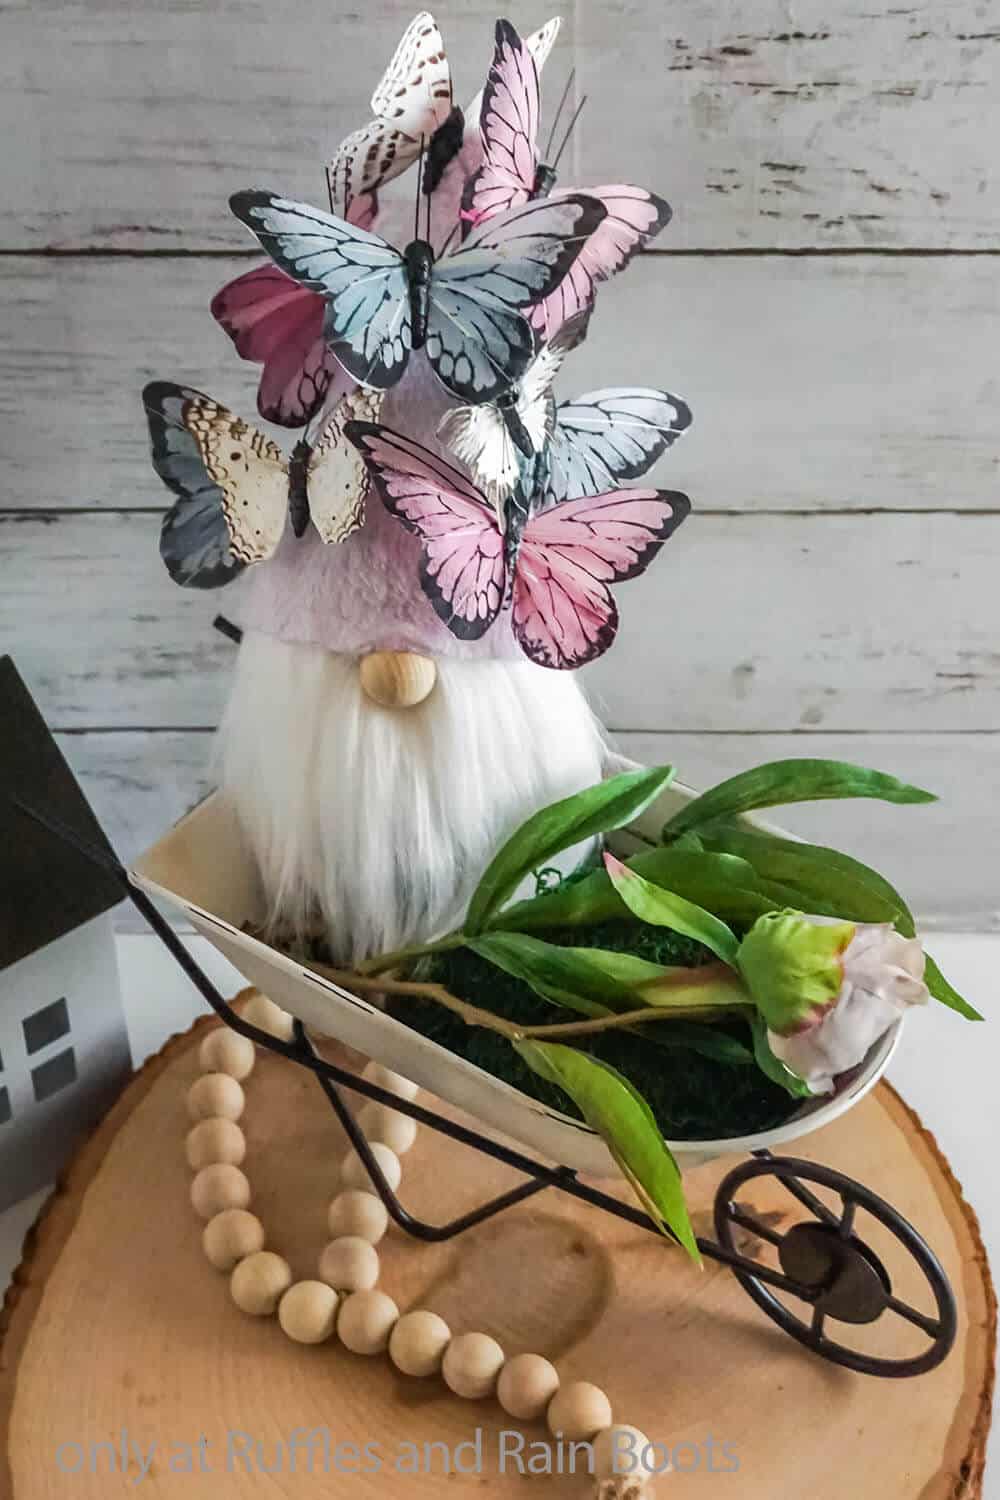 Vertical close up image of a butterfly hat spring gnome with white fur beard beard and wooden nose, sitting in a mini wheelbarrow with flowers.